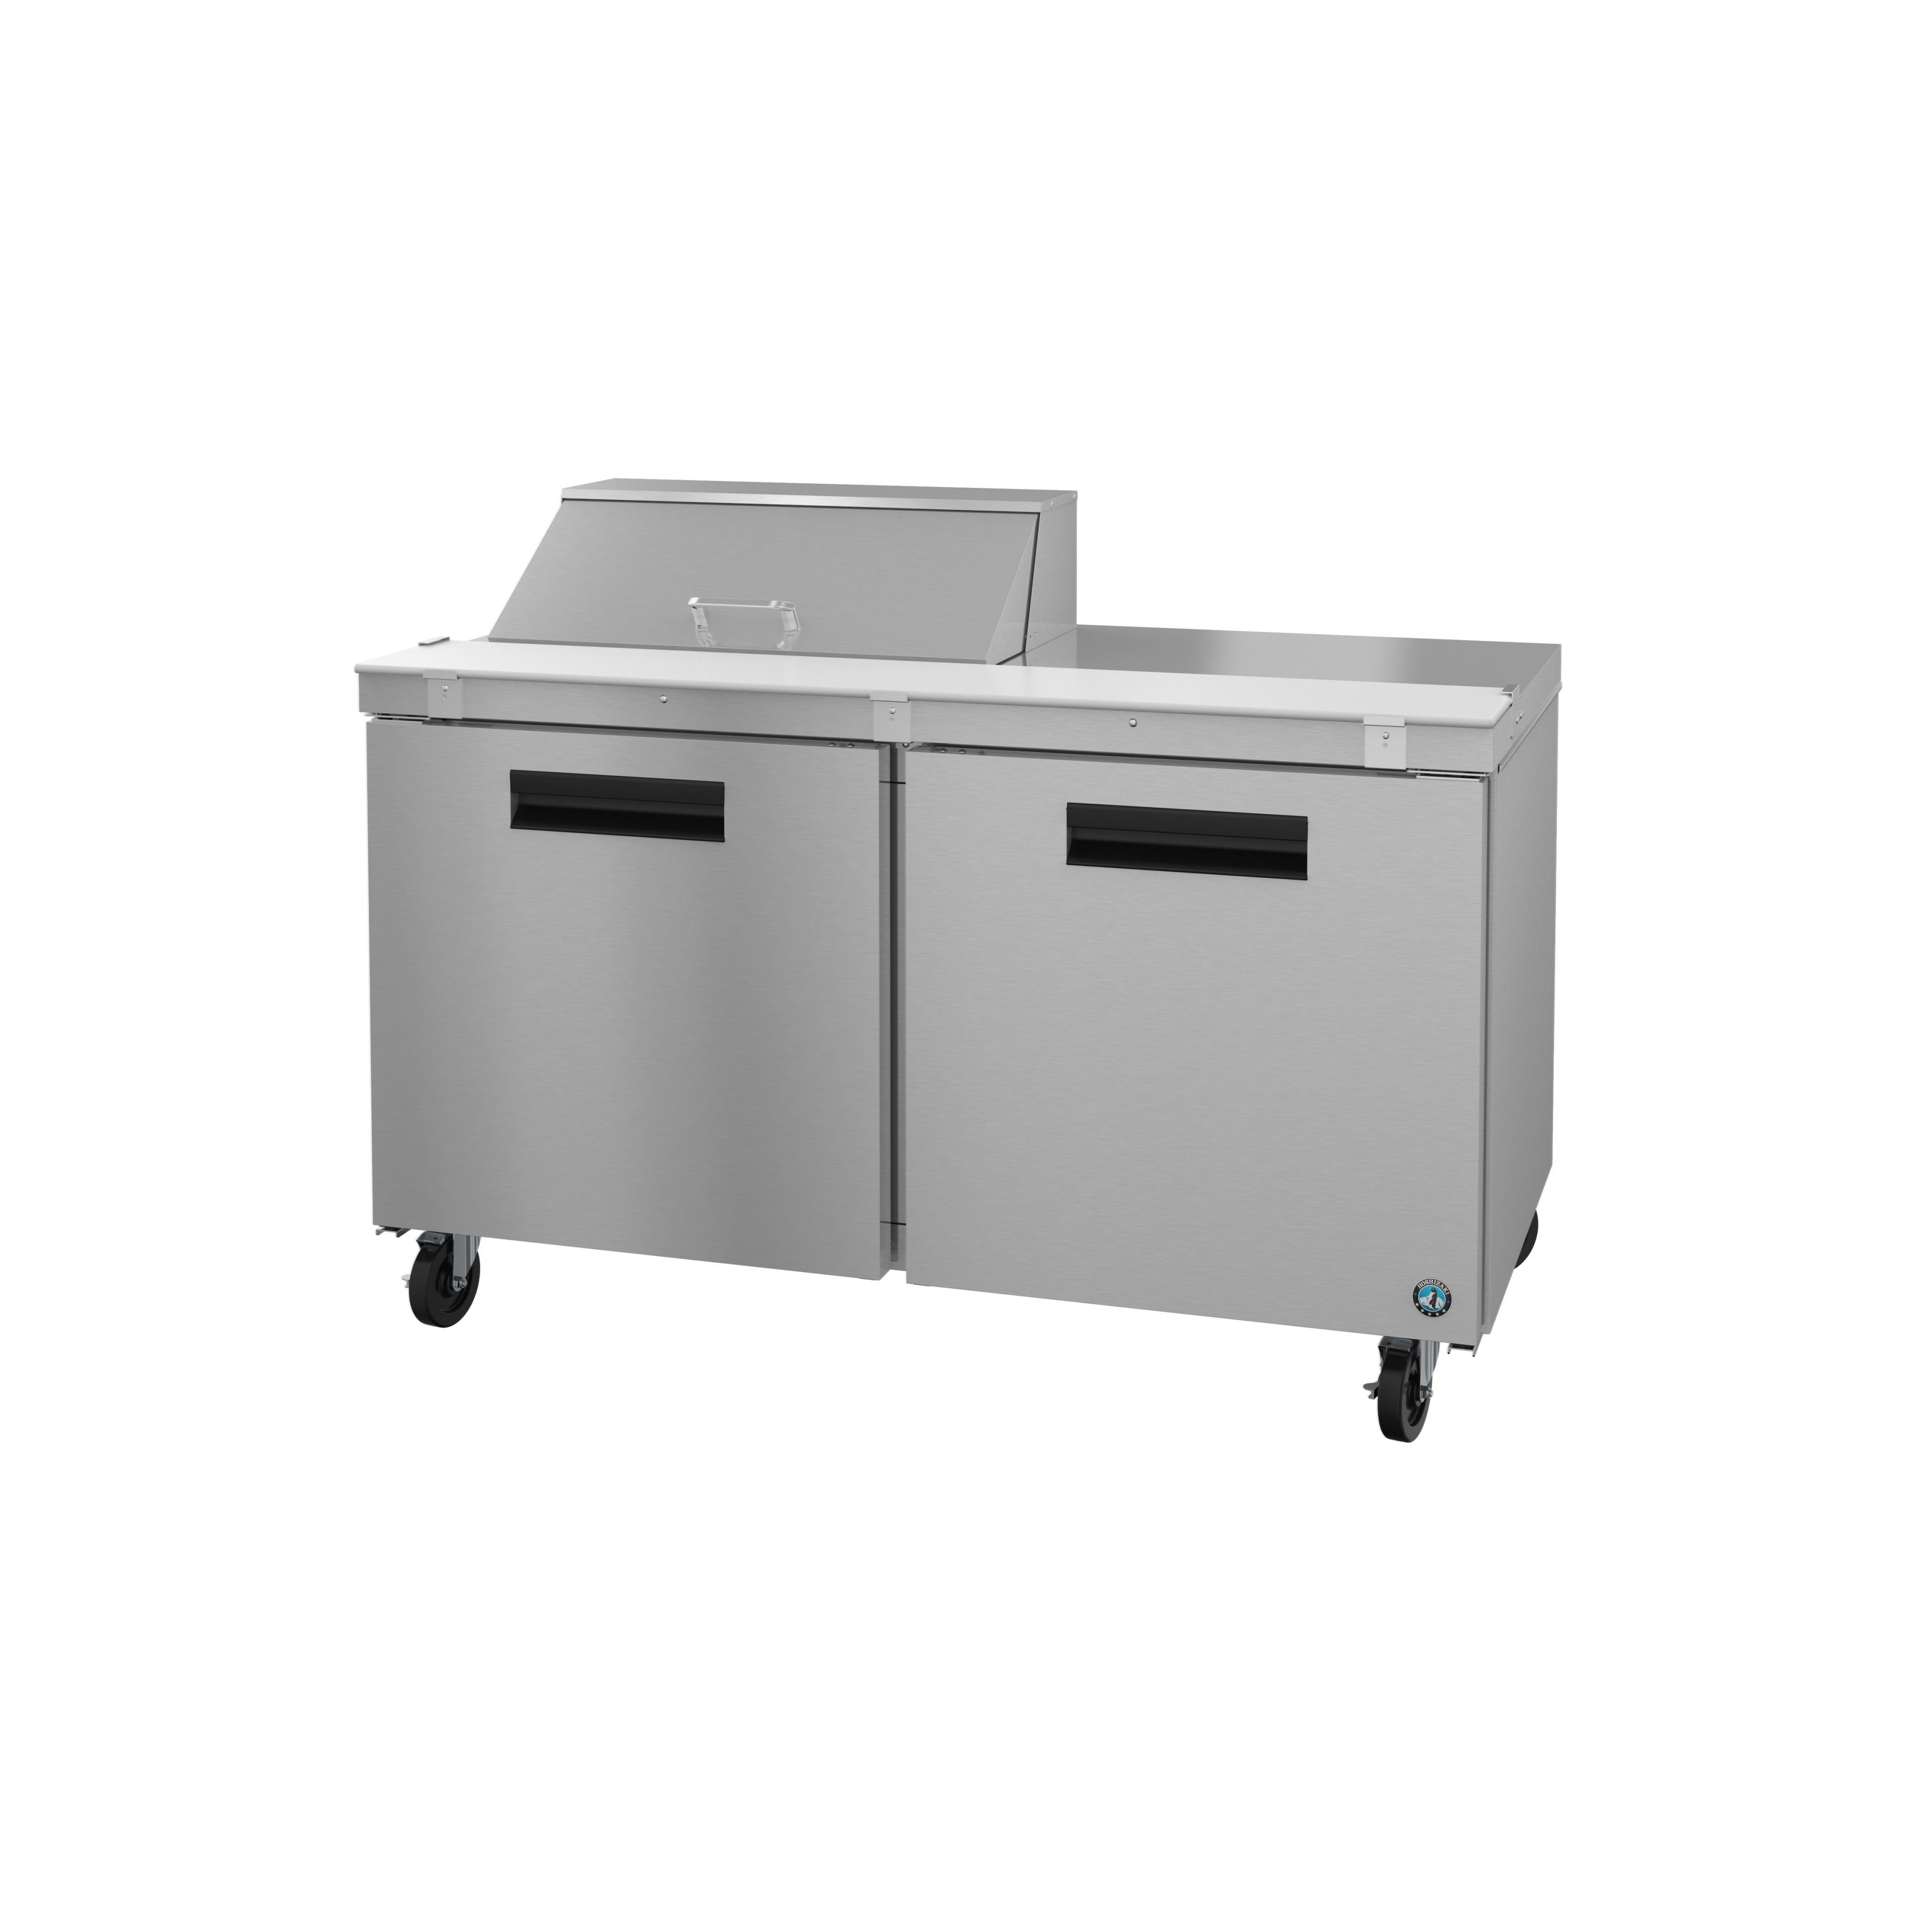 Hoshizaki - SR60B-8, Commercial 60" Two Section Sandwich Prep Table Refrigerator Stainless Doors 14.8cu.ft.